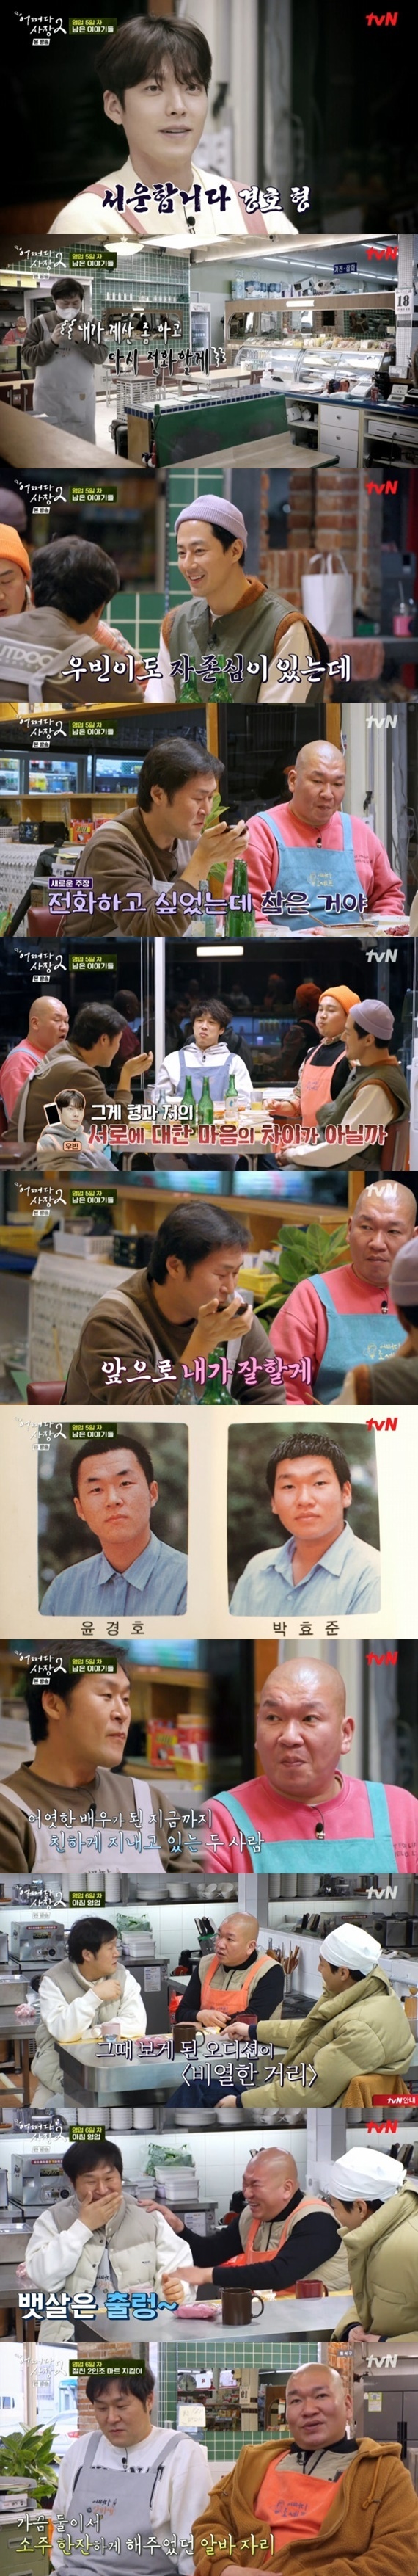 Seoul = = How the President 2 Yunkyoung laughed as he soothed Kim Woo-bin.In the TVN entertainment program How the President 2, which was broadcasted at 8:40 pm on the 14th, the business continued with the three noirs (Shin Seung-hwan Yunkyoungho Park Hyo-joon).While finishing the business and unpacking the club, Yunkyoung contacted Kim Woo-bin.Kim Woo-bin, the first student of Communist Mart, contacted Yunkyoung but said he did not receive a reply for three weeks.Yunkyoung contacted Kim Woo-bin at Mart, but the guests came and hung up urgently and the two people were confused again.On the phone of Yunkyoung, Kim Woo-bin laughed, revealing his sadness, saying, Who is this?Yunkyoung said he did not receive Kim Woo-bins call because he was riding because of the shooting, but he contacted him three times later, but he did not connect the phone.In addition, Yunkyoung explained, I wanted to call you, but I was patient. Jo In-sung said, Do you two love each other?The two misunderstandings were solved by a pleasant conversation, and Kim Woo-bin added fun to Jo In-sung by saying that he was still tired after his visit to How the President 2.On this day, Yunkyoung and Park Hyo-joon said that they were high school alumni and dreamed of acting together.Yunkyoung said that Park Hyo-joon had seen the movie The Dirty Street Audition to see the audition when the movie The Cruelty of the Horse hit the jackpot.Yunkyoung practiced all night in the first edition and carried the necessary knife to the audition field for acting.In addition, Yunkyoung did not know anything about Audition, so he laughed at the director who gave the ambassador to the opponent by telling his experience of pointing out the acting.Yunkyoung and Park Hyo-joon went to the acting institute together and recalled memories that they had together with the flyer Alba, attracting attention with their emotional appearance.On the other hand, TVN entertainment program How the President 2 is a program that contains the second rural super sales diary of the city man Cha Tae-hyun x Jo In-sung who took charge of the country shop and is broadcasted every Thursday at 8:40 pm.